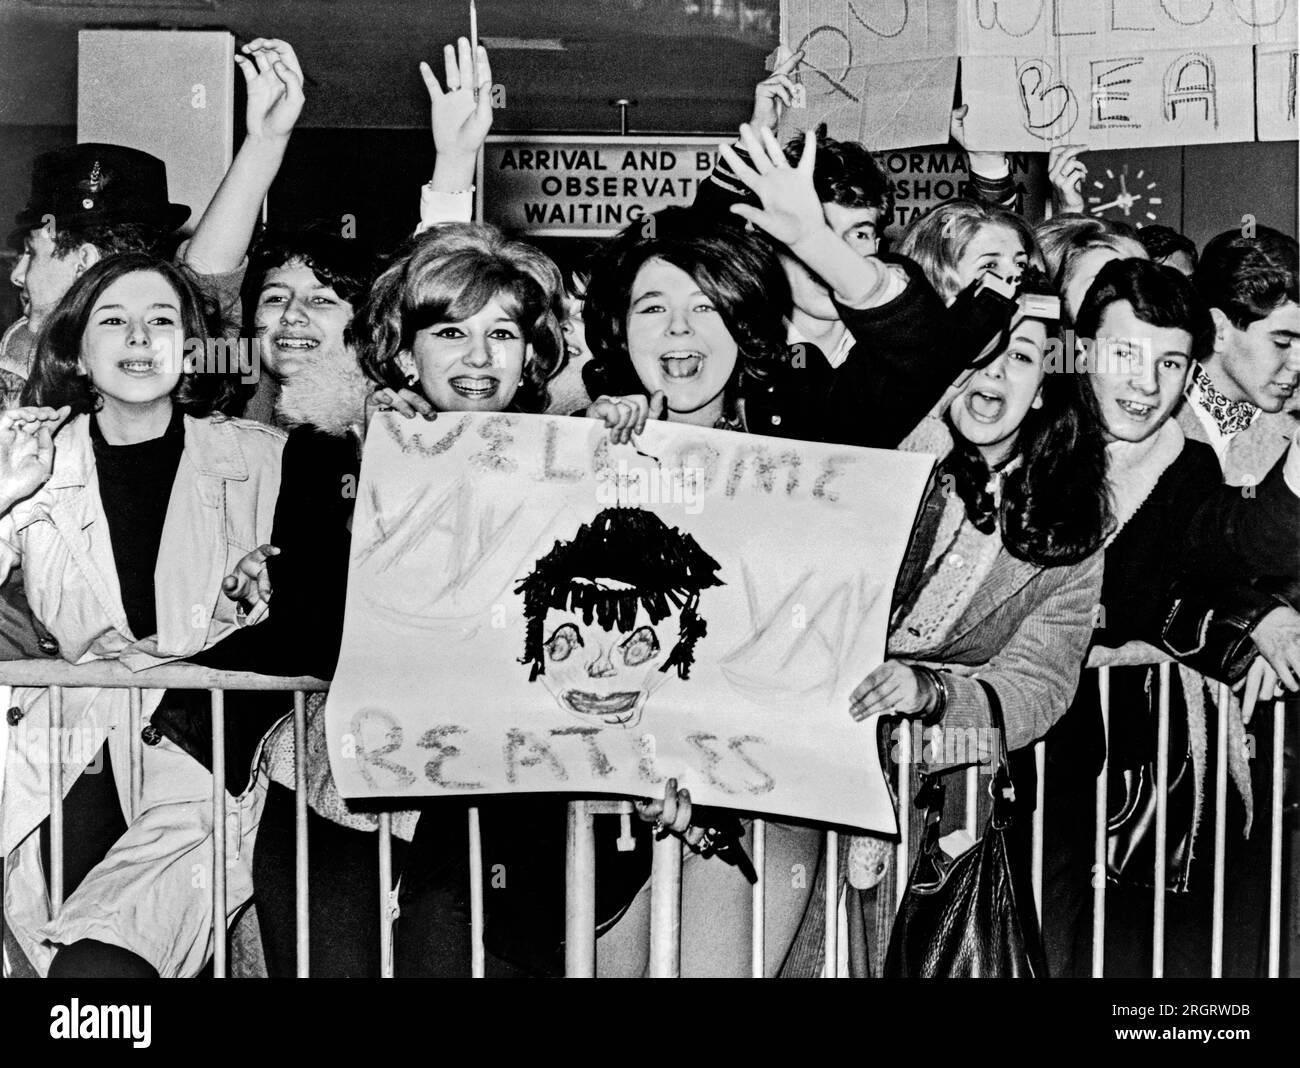 New York, New York:  February 7, 1964. Screaming teenagers wave a crude sign as they welcome "The Beatles" - Britain's shaggy-haired rock n' roll singers - upon their arrival at New York's John F. Kennedy Airport. Stock Photo